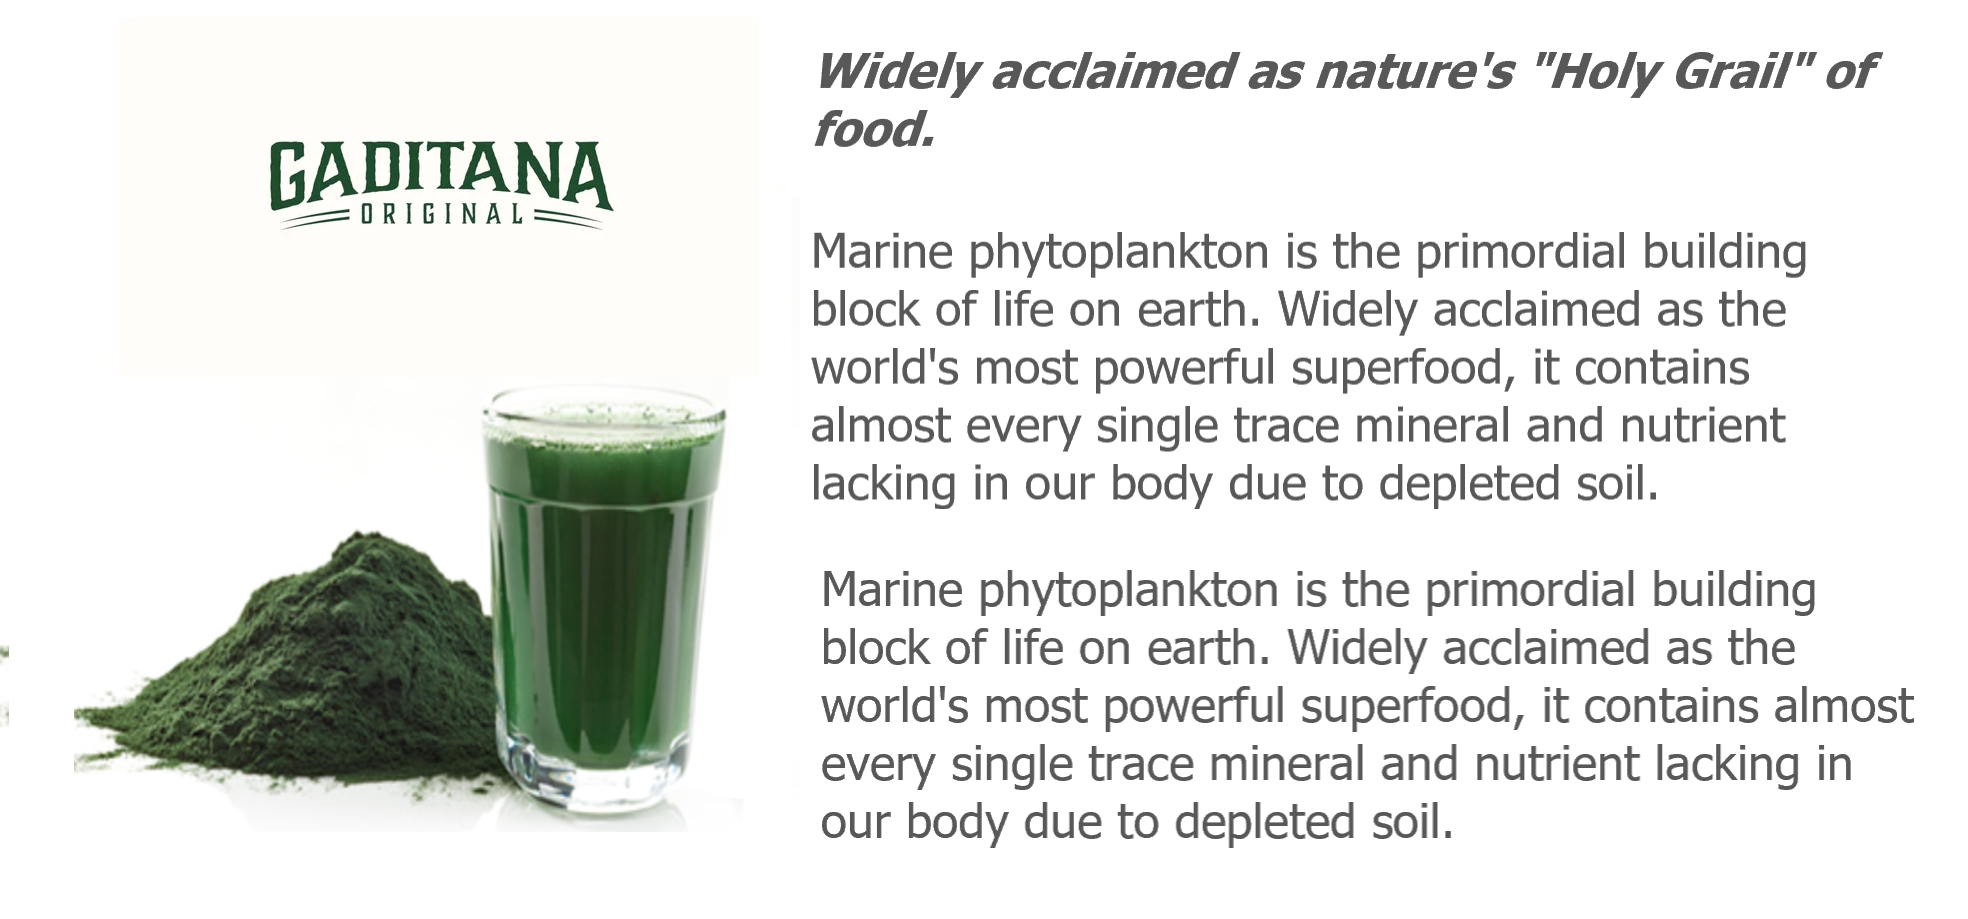 Marine phytoplankton is the primordial building block of life on earth. Widely acclaimed as the world's most powerful superfood, it contains almost every single trace mineral and nutrient lacking in our body due to depleted soil